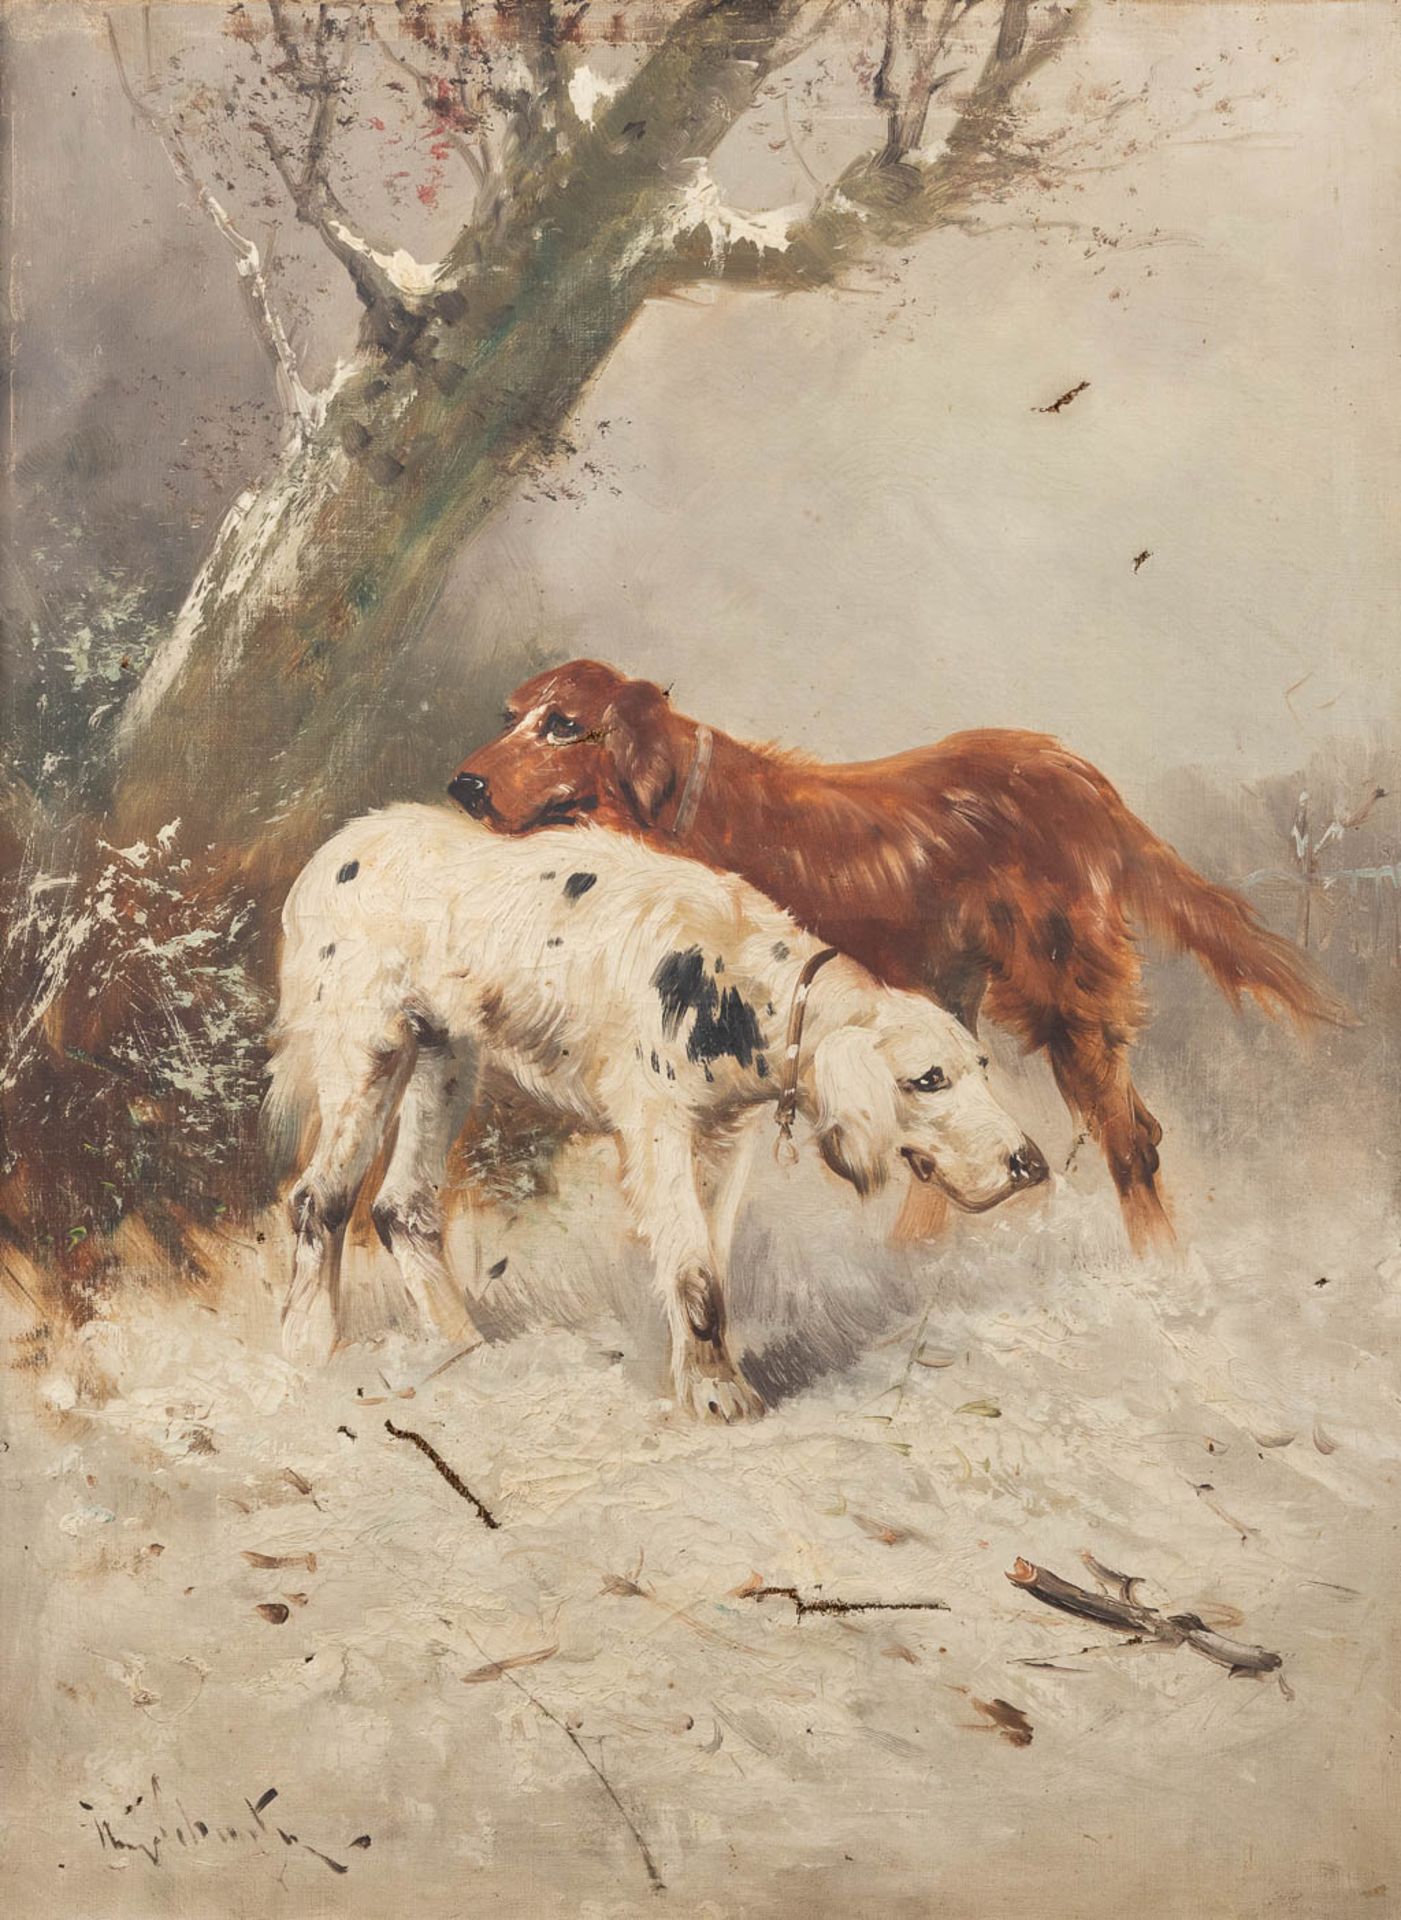 Henry SCHOUTEN (1857/64-1927) 'Dogs in the snow' oil on canvas. (W: 60 x H: 80 cm)